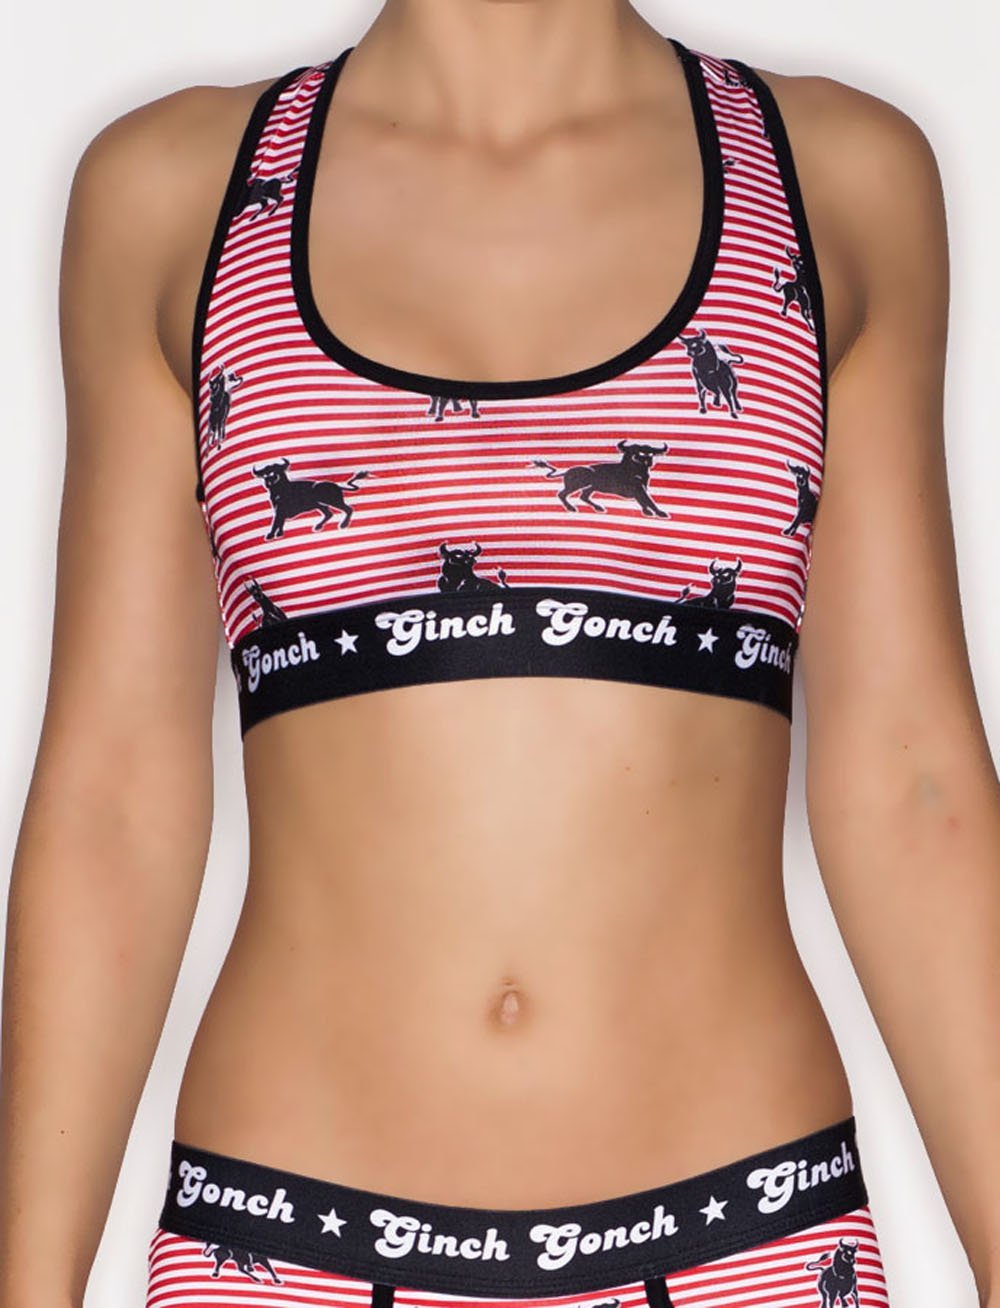 Ginch Gonch Wild Bulls Women's Underwear Sports Bra Red and white Stripes  with black bulls black trim and black printed waistband front 